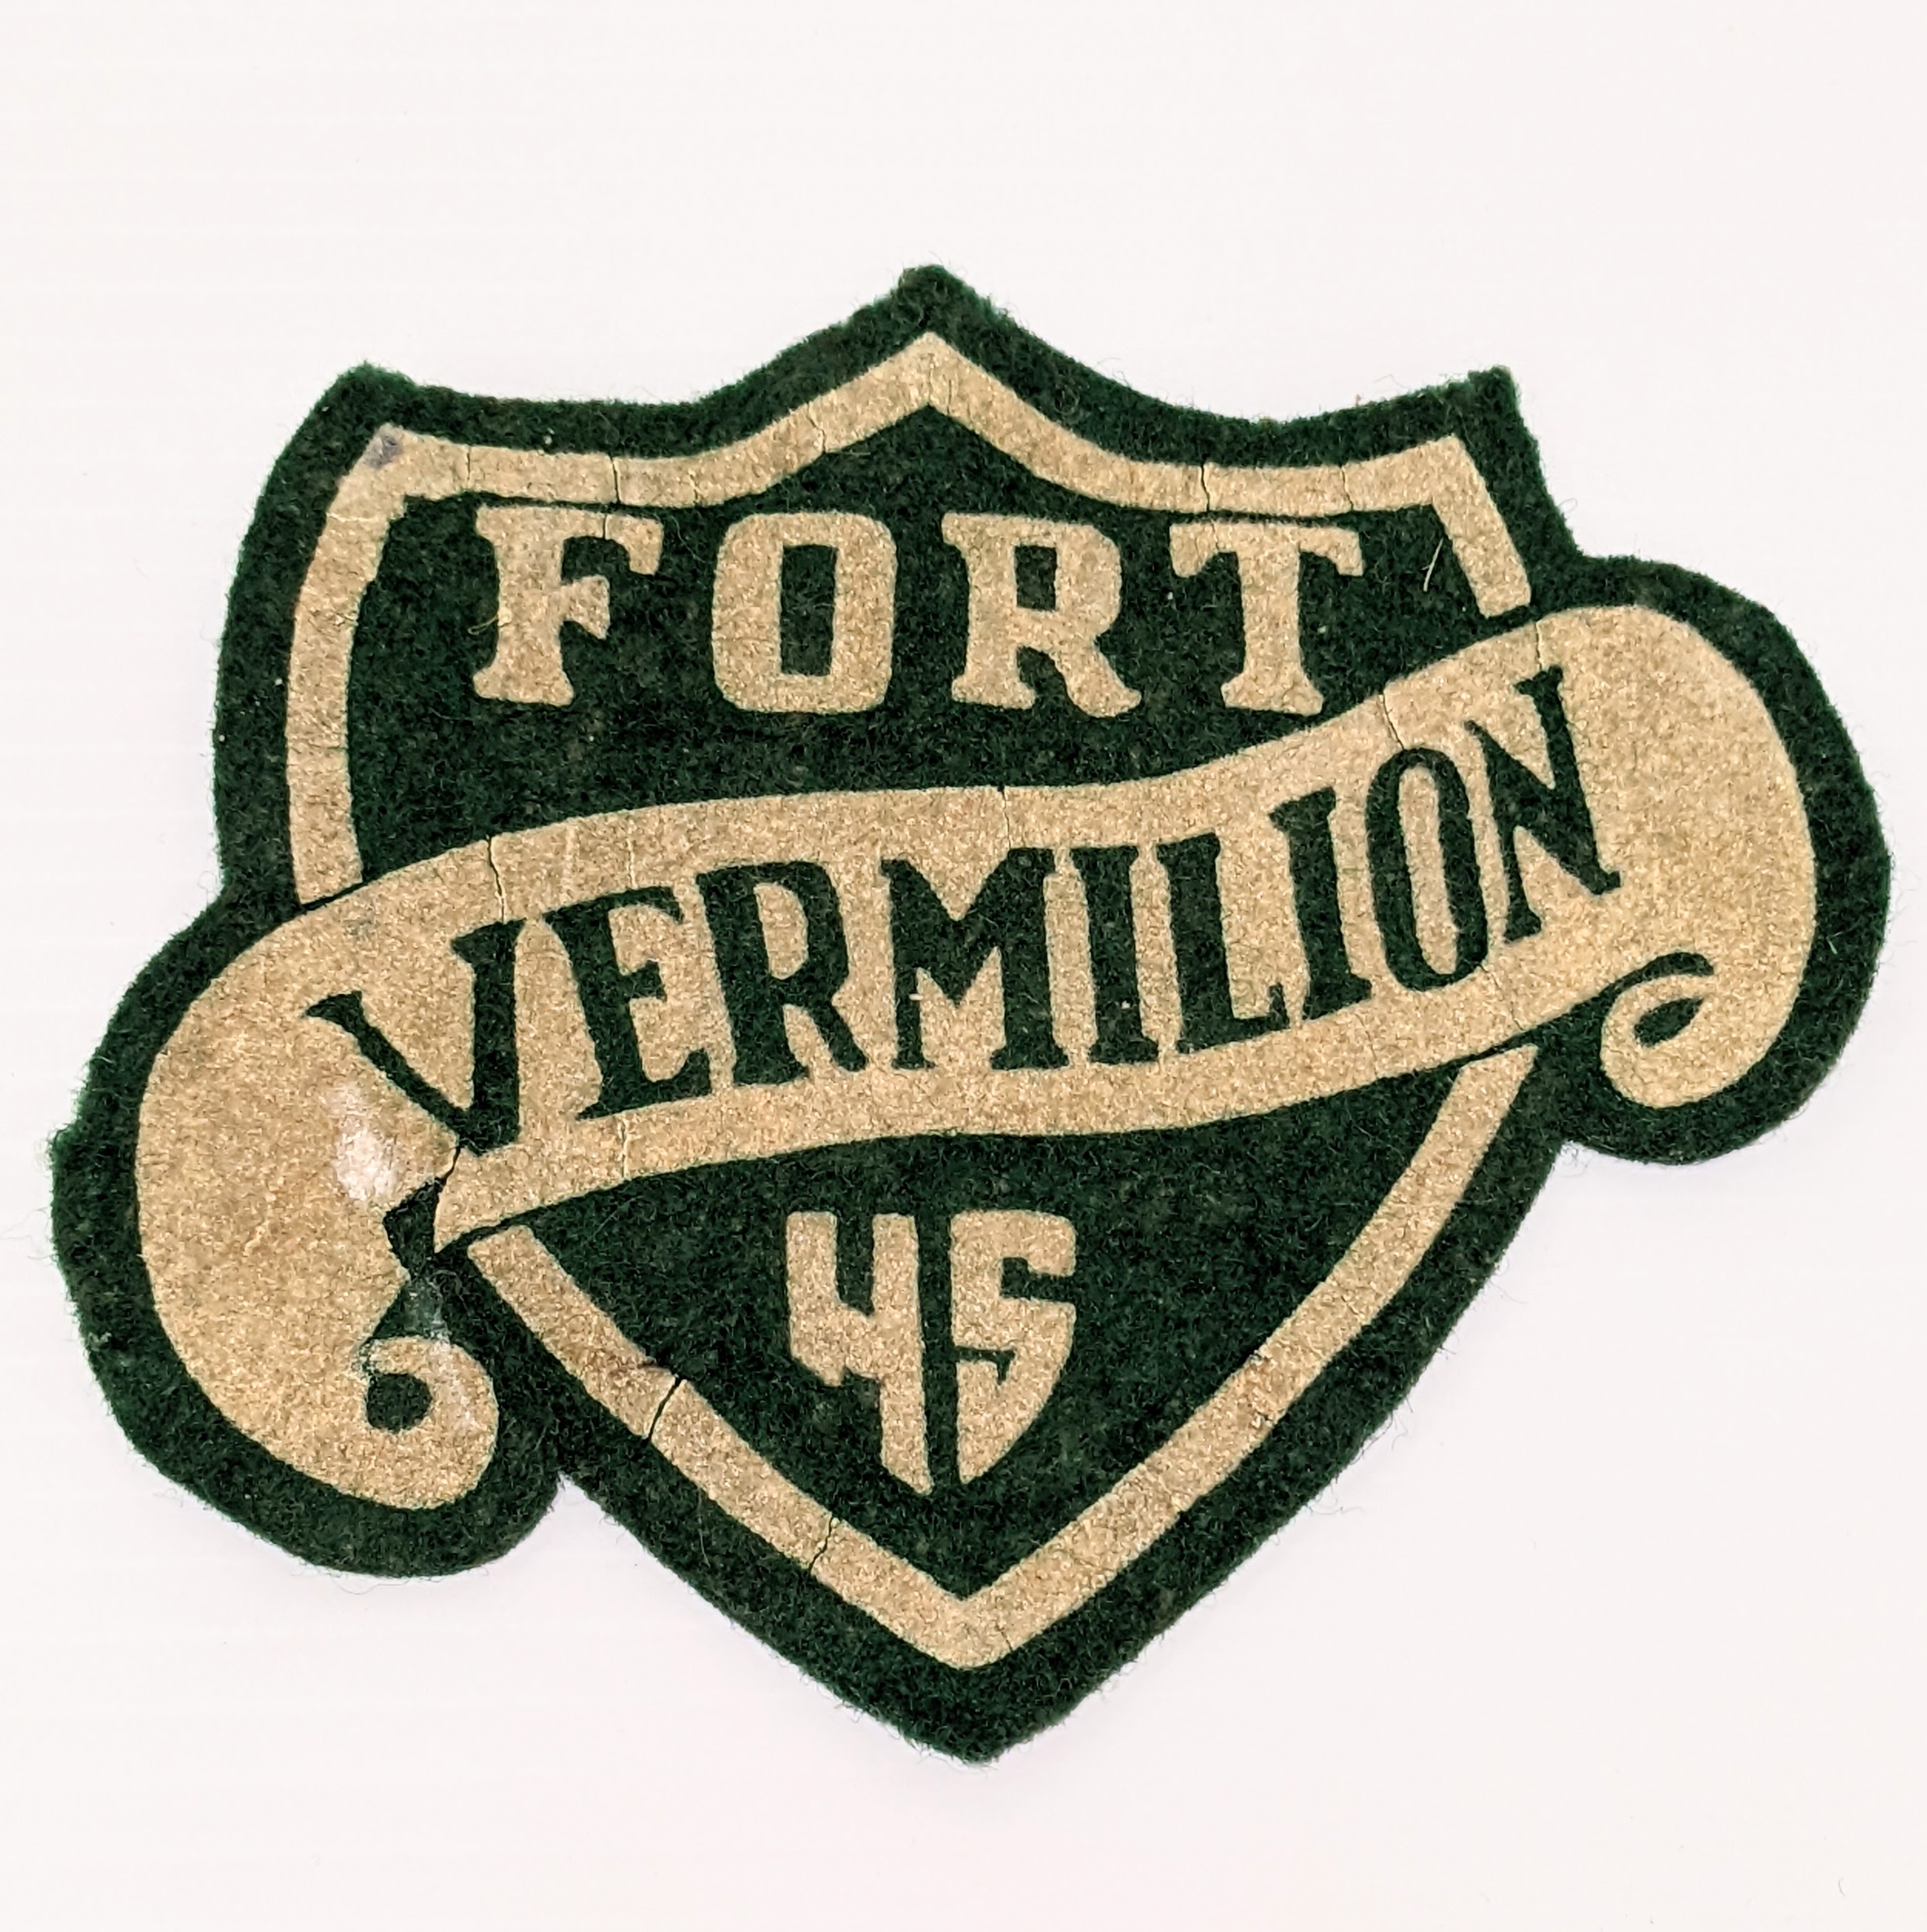 This Crest comes from the Fort Vermilion Public school in 1952! It is made of felt and would be stitched to a jacket / garment. The first public school for Fort Vermilion was established in the 30's. At this time there was also the residential school and separate school - which both belonged to the catholic school system. Though we are not sure where the original public school was located, the one previous todays modern facility was located at the top of the hill behind what is now an FVSD maintenance building.
23/05/2022
2009.70.04 / Ward, Hazel